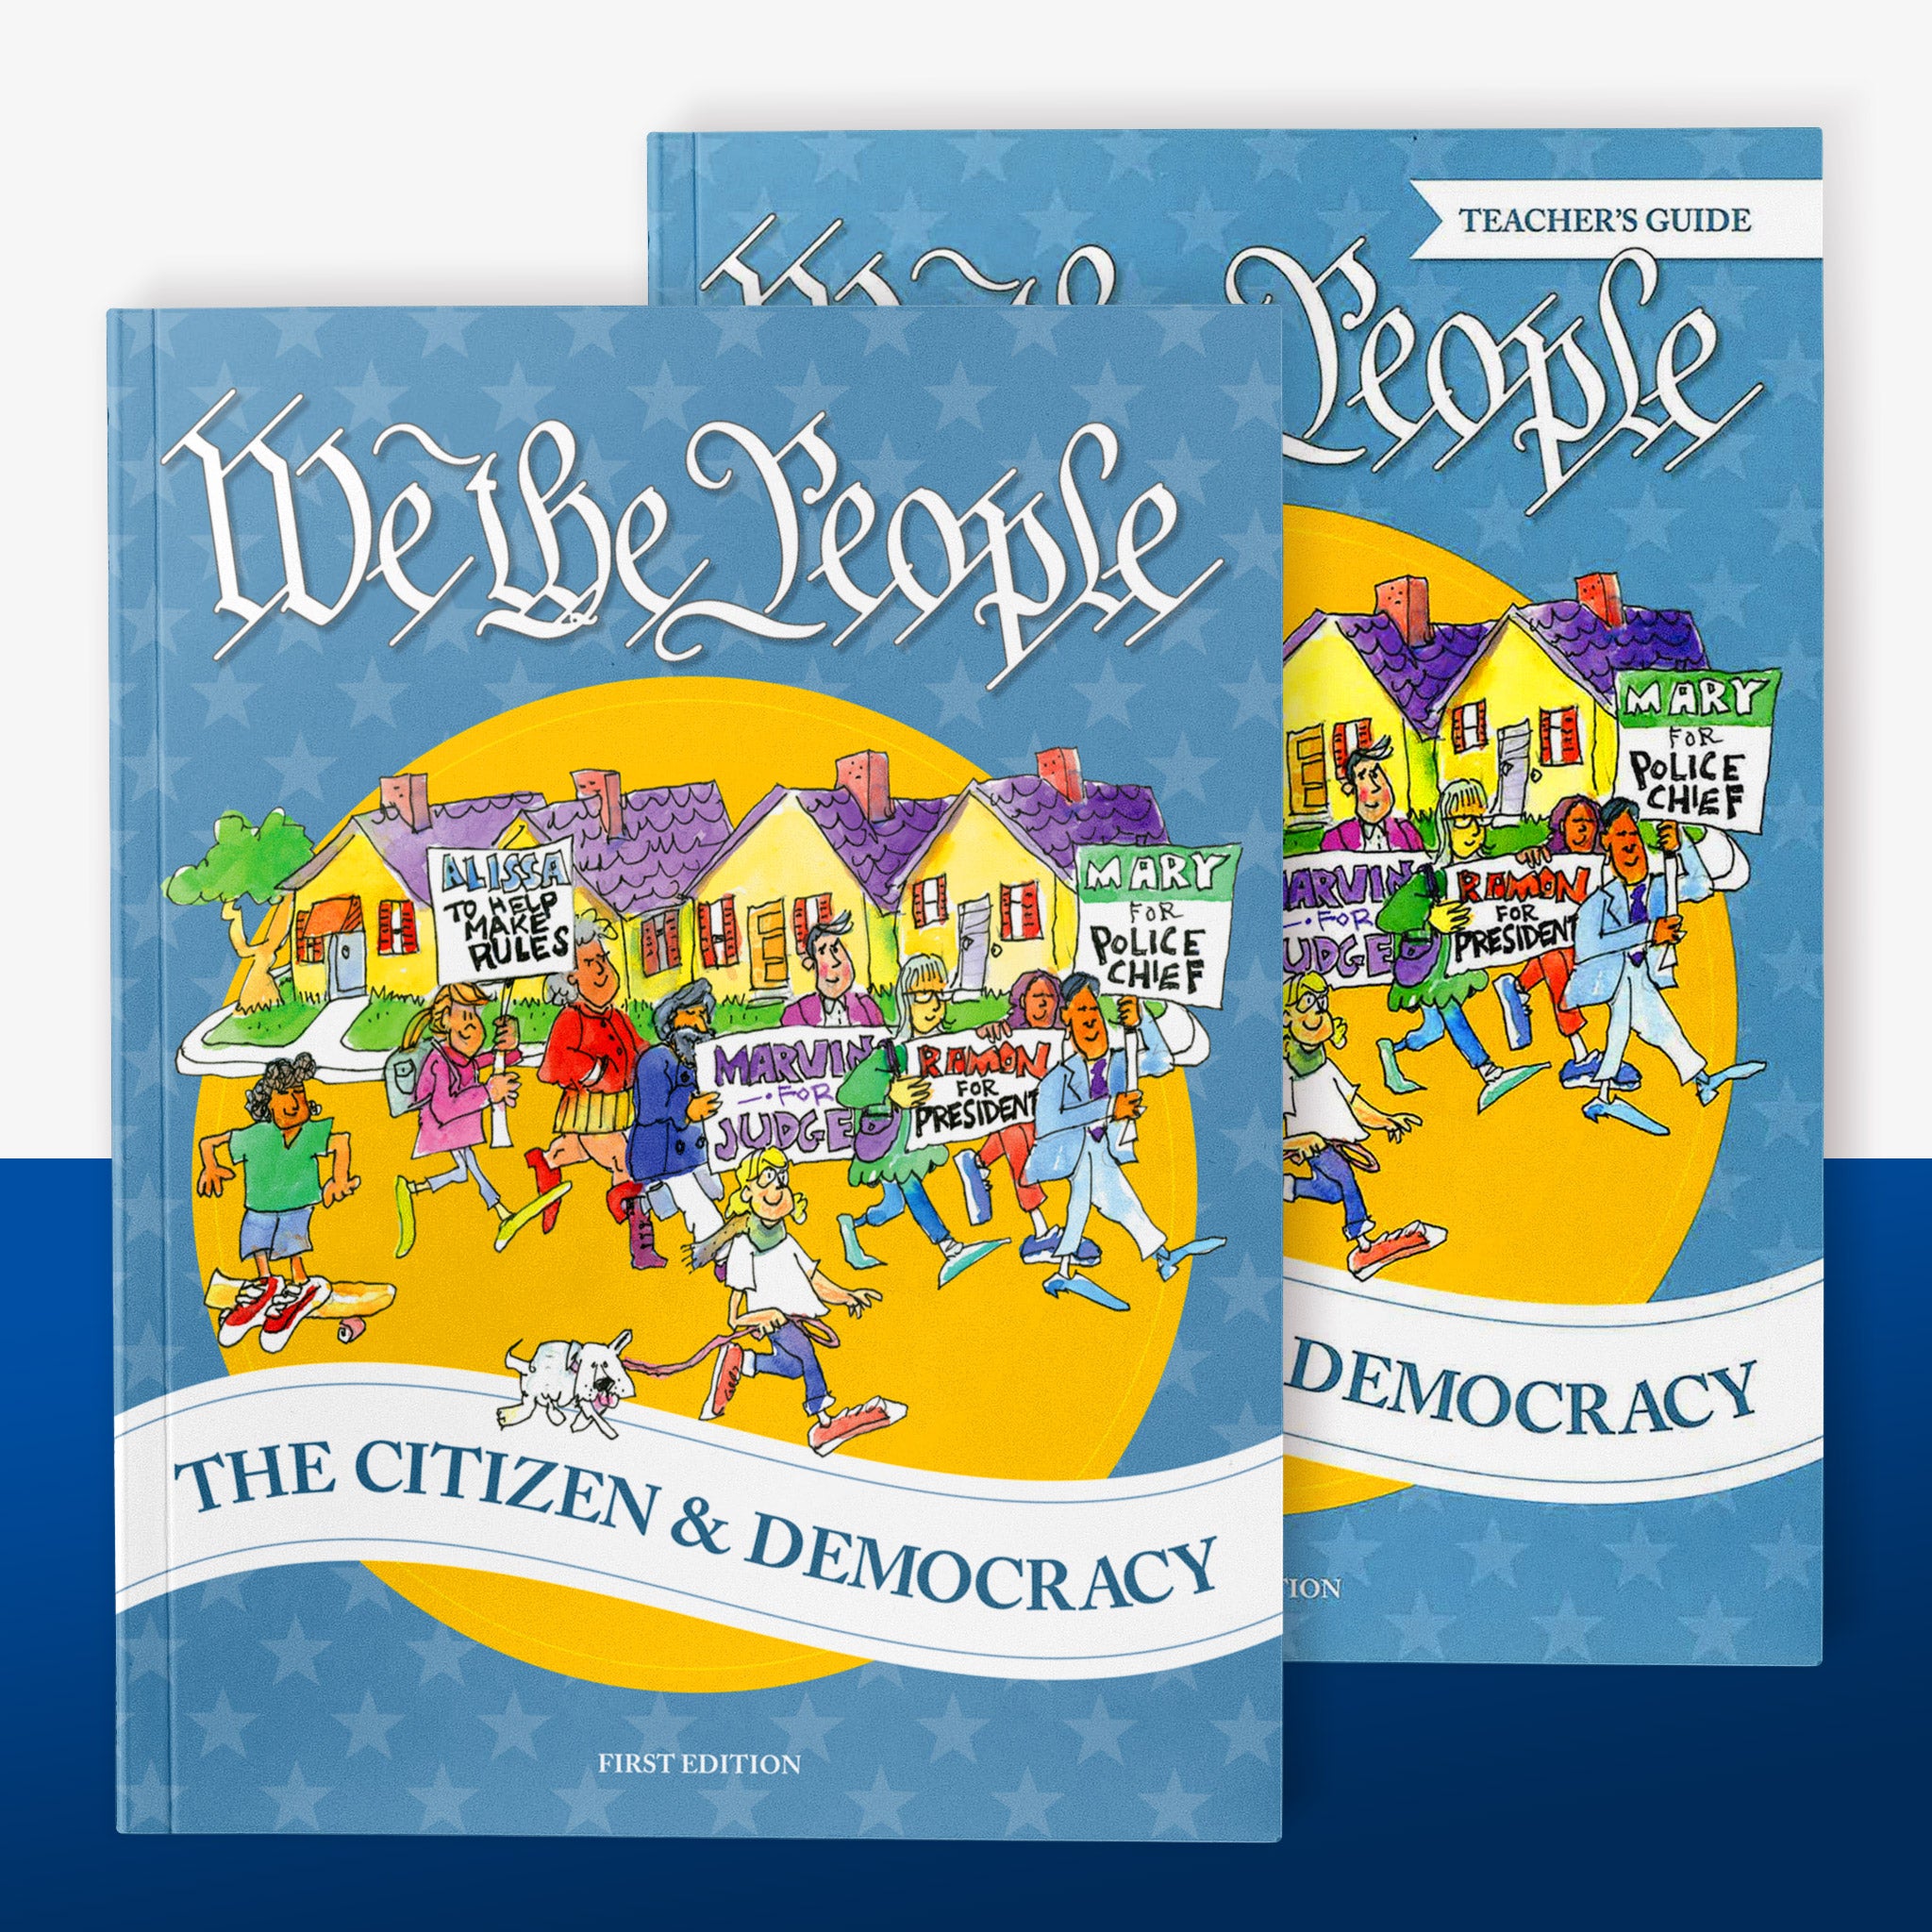 WE THE PEOPLE POSTER PACK